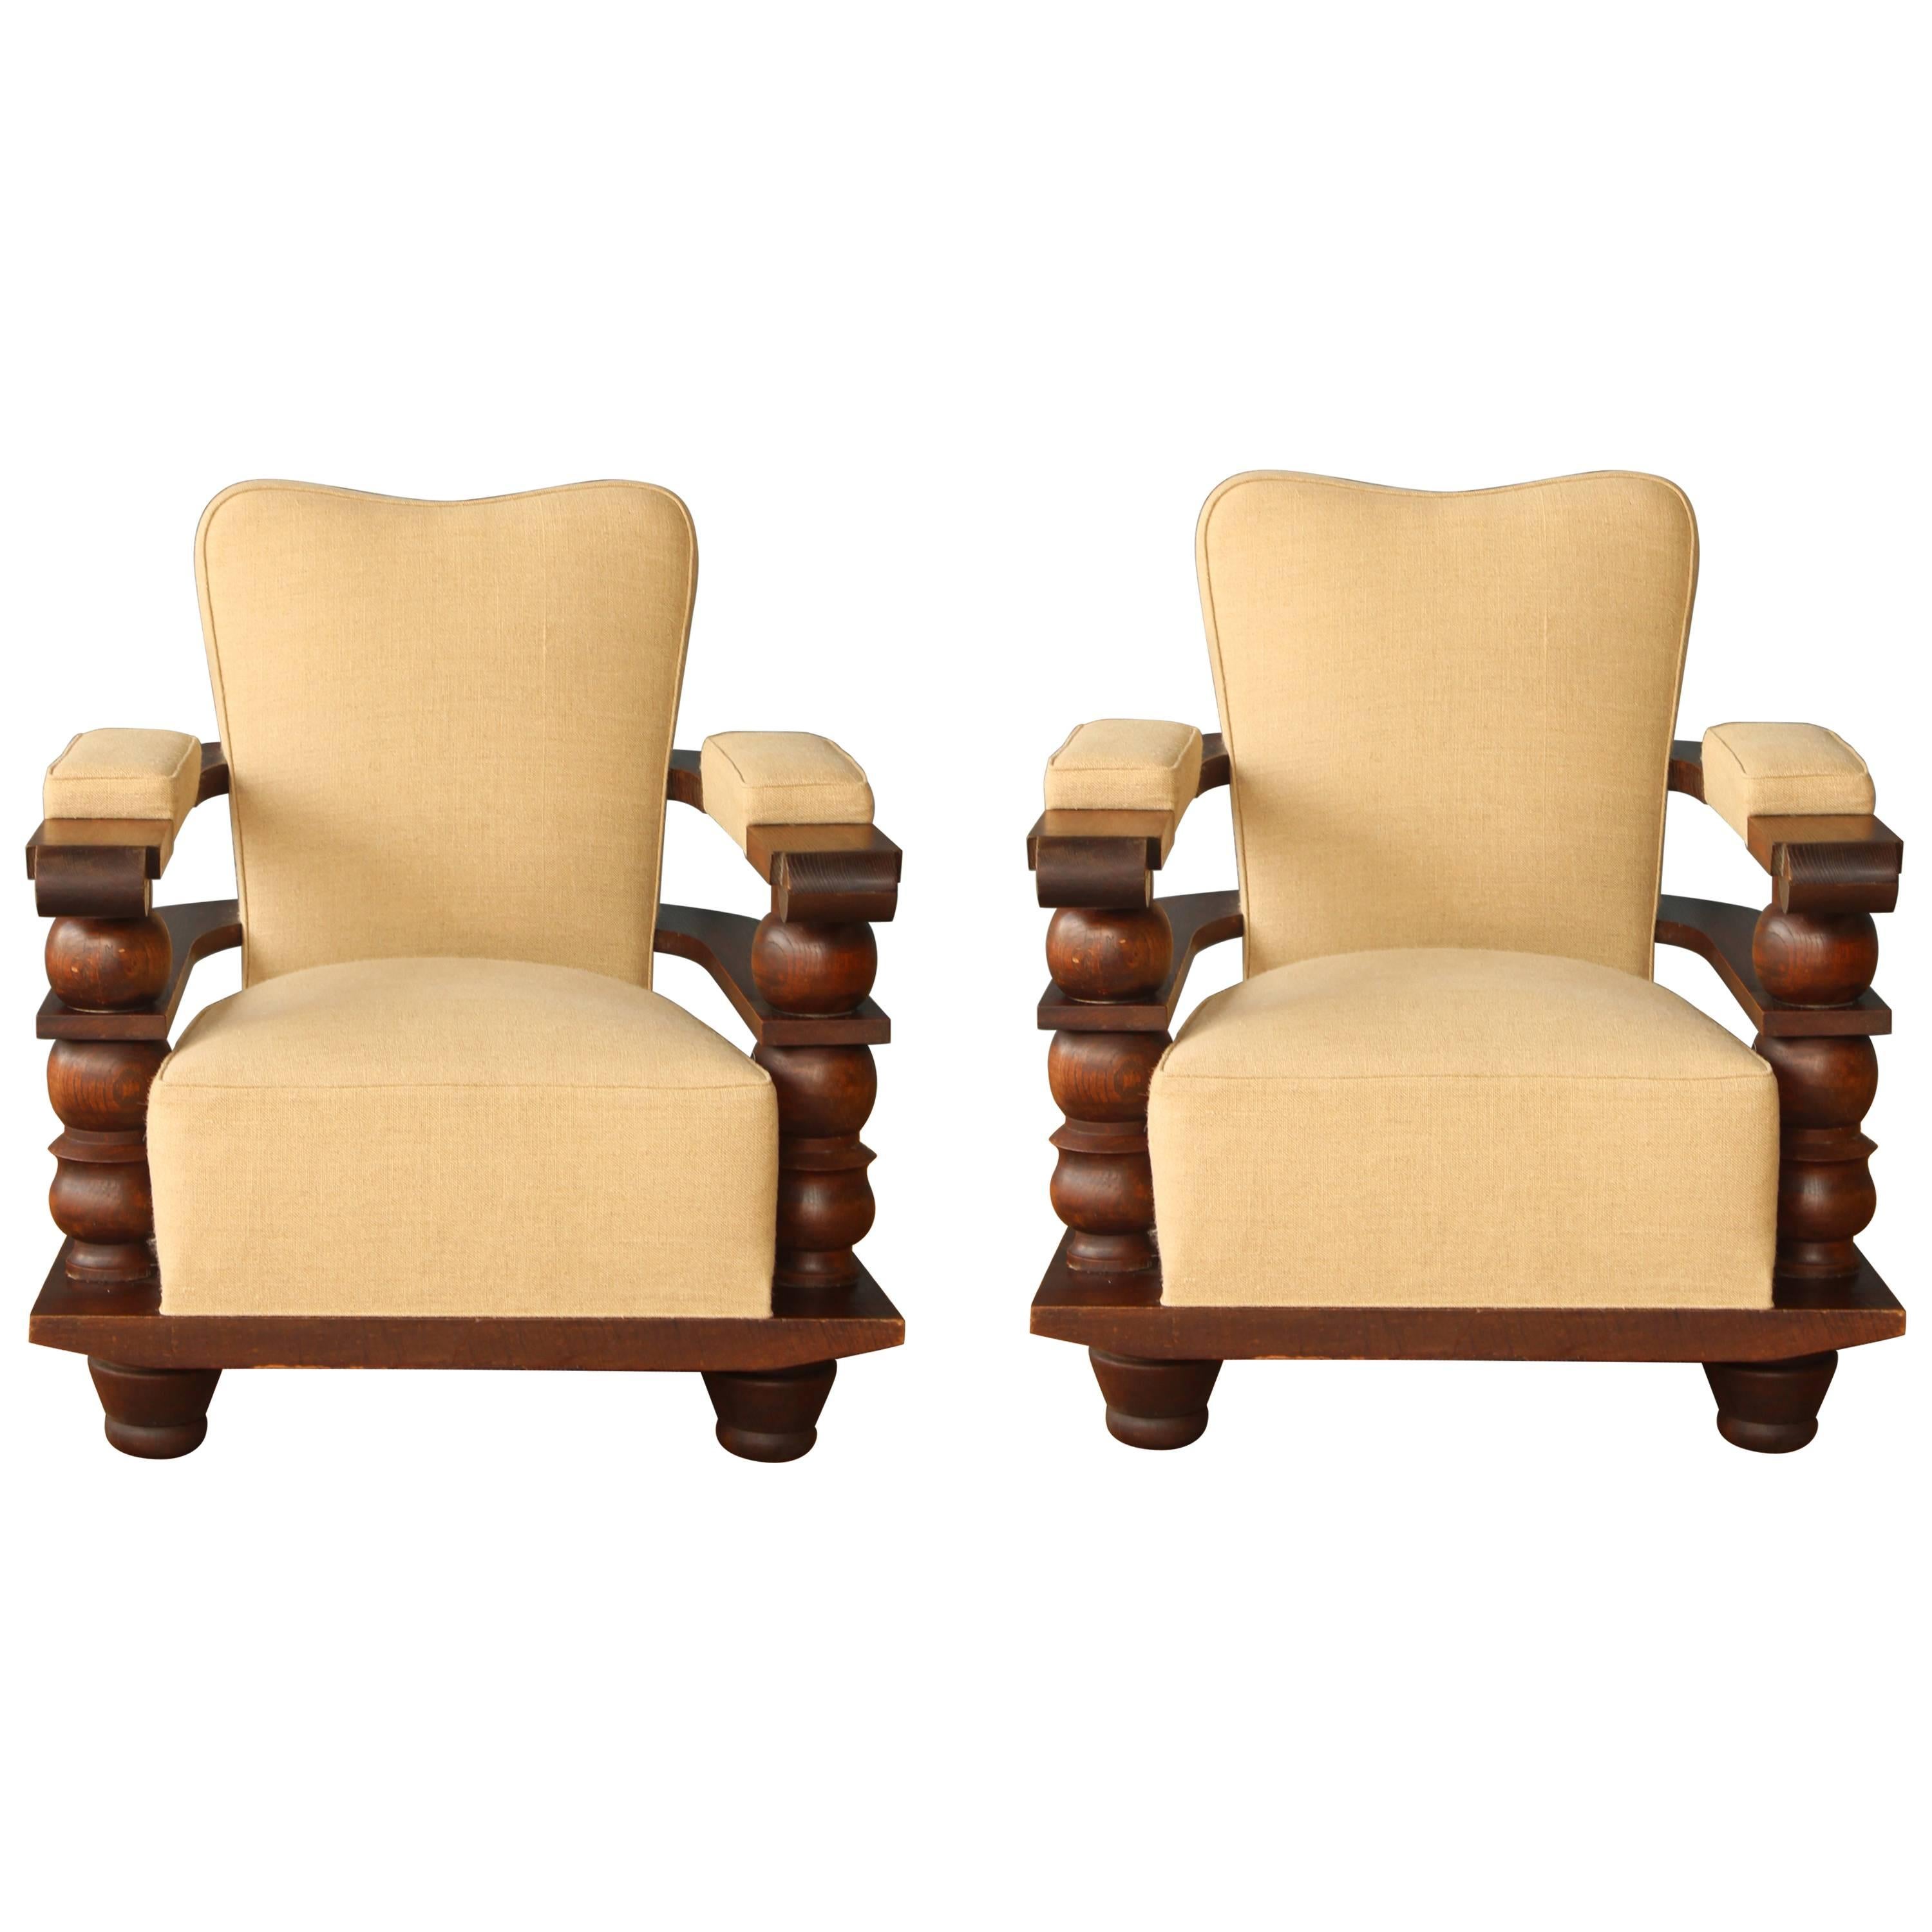 Two Vintage Chairs from Biarritz